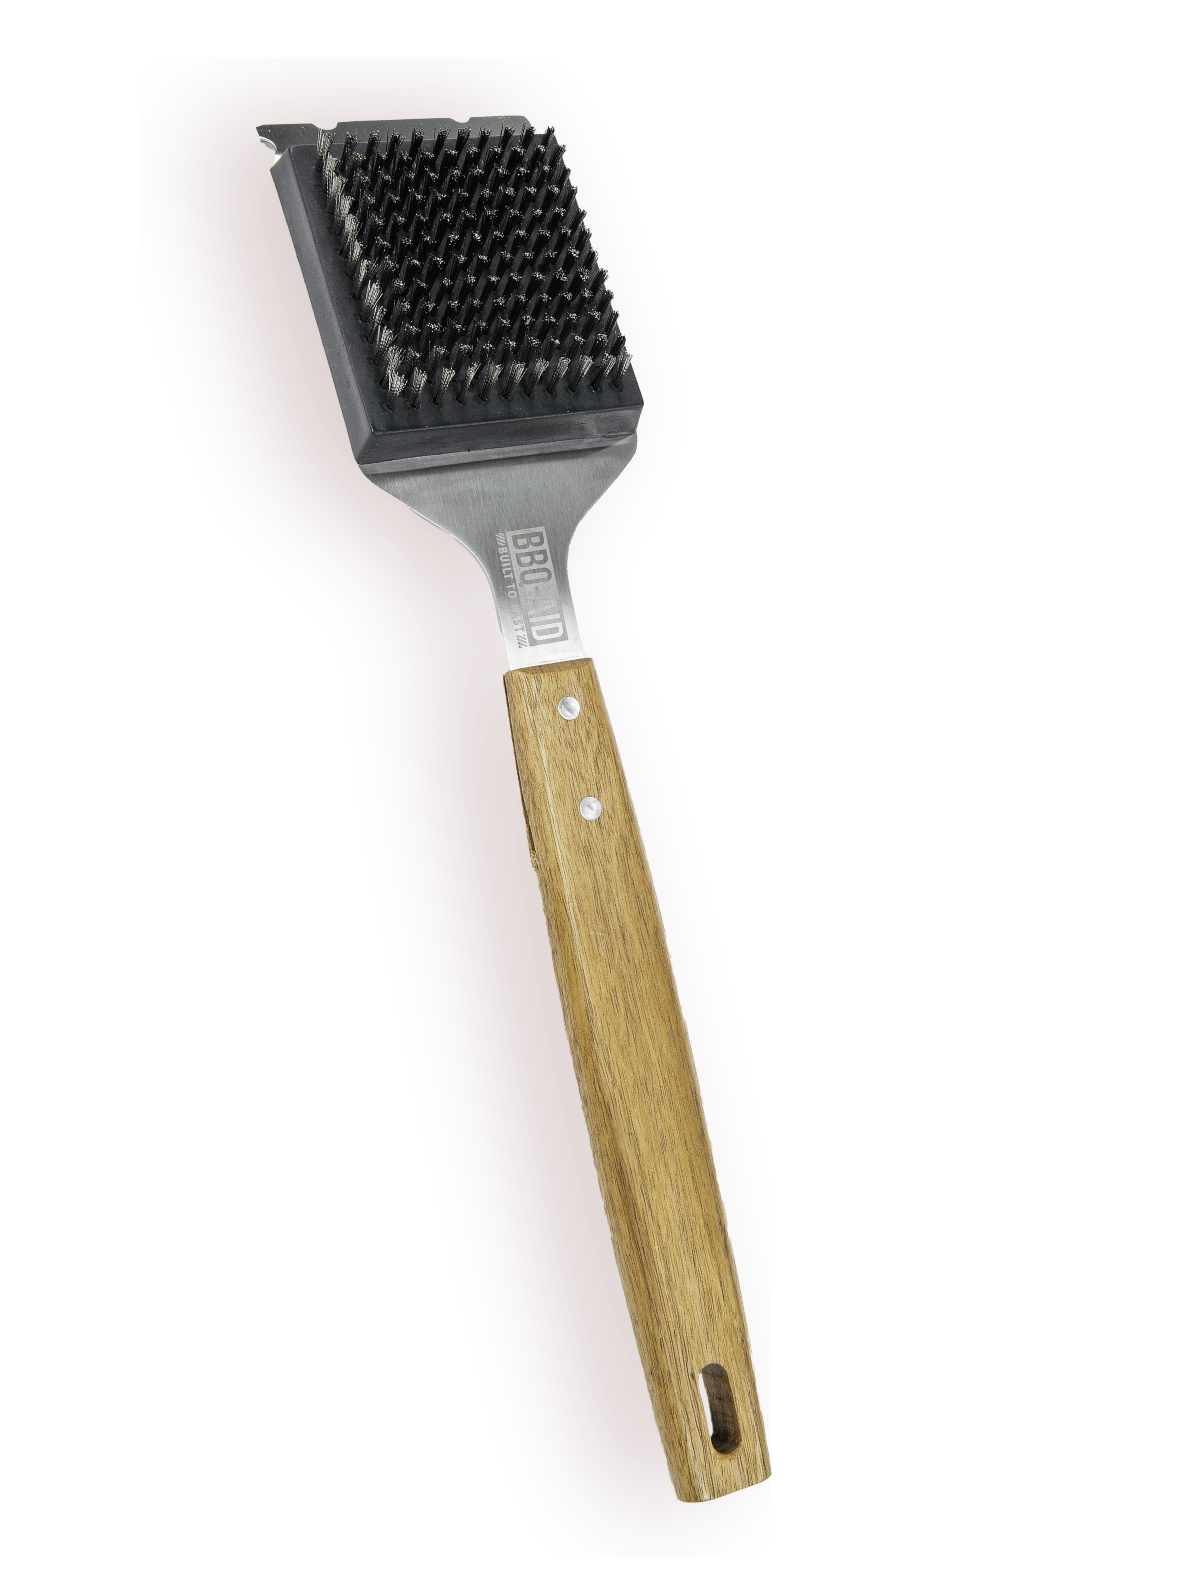 BBQ-AID All Angles BBQ Grill Brush for Outdoor Grill – Cleans All Angles,  Large Wooden Handle, and Stainless Steel Bristles - BBQ Brush for Grill